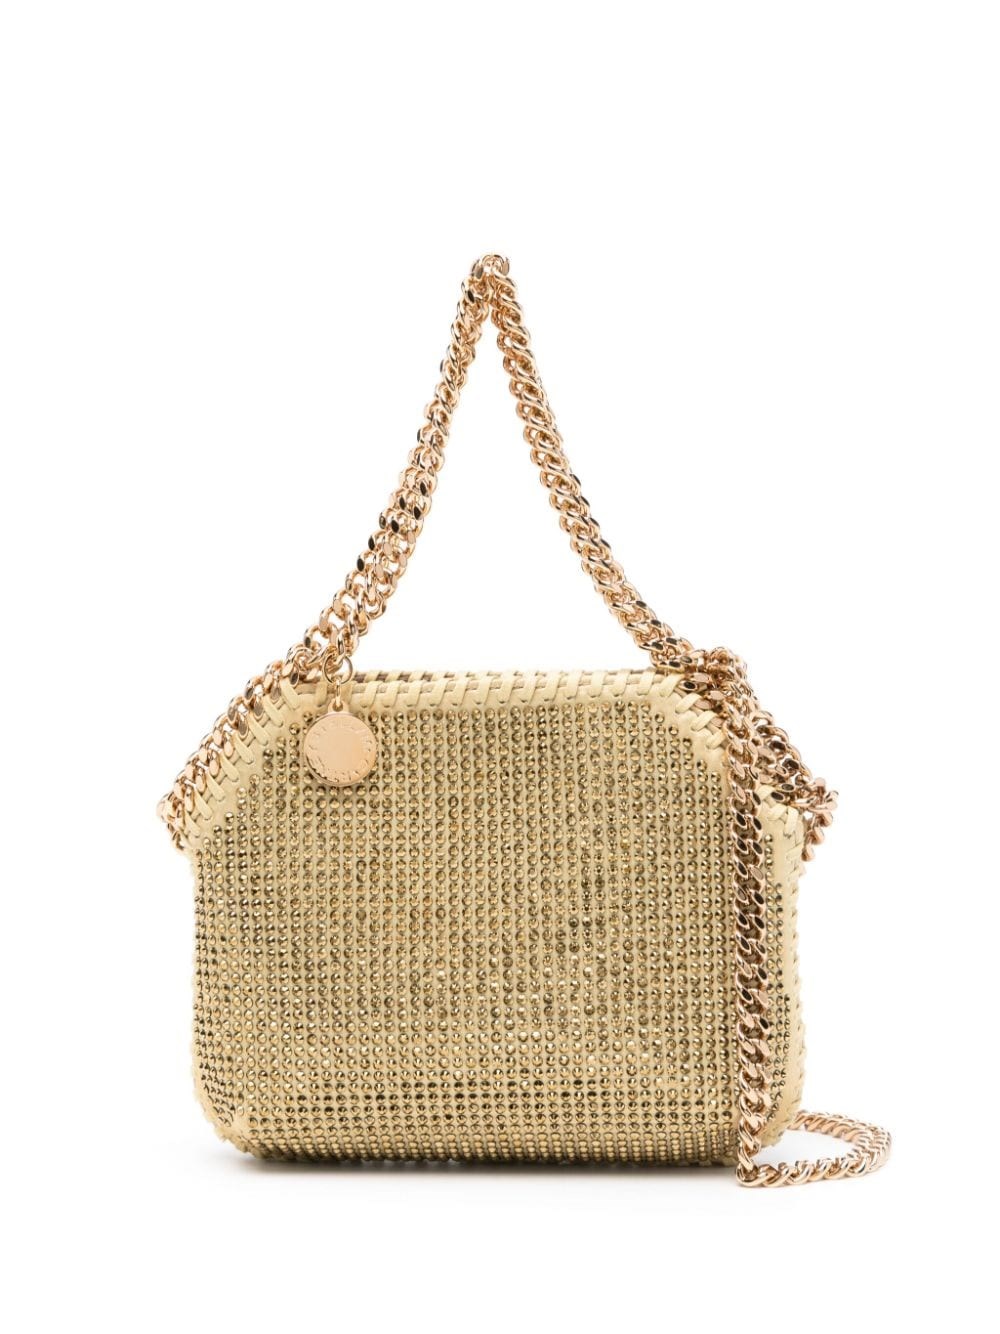 Stella Mccartney Mini Tote Bag With Falabella Crystals In Gold